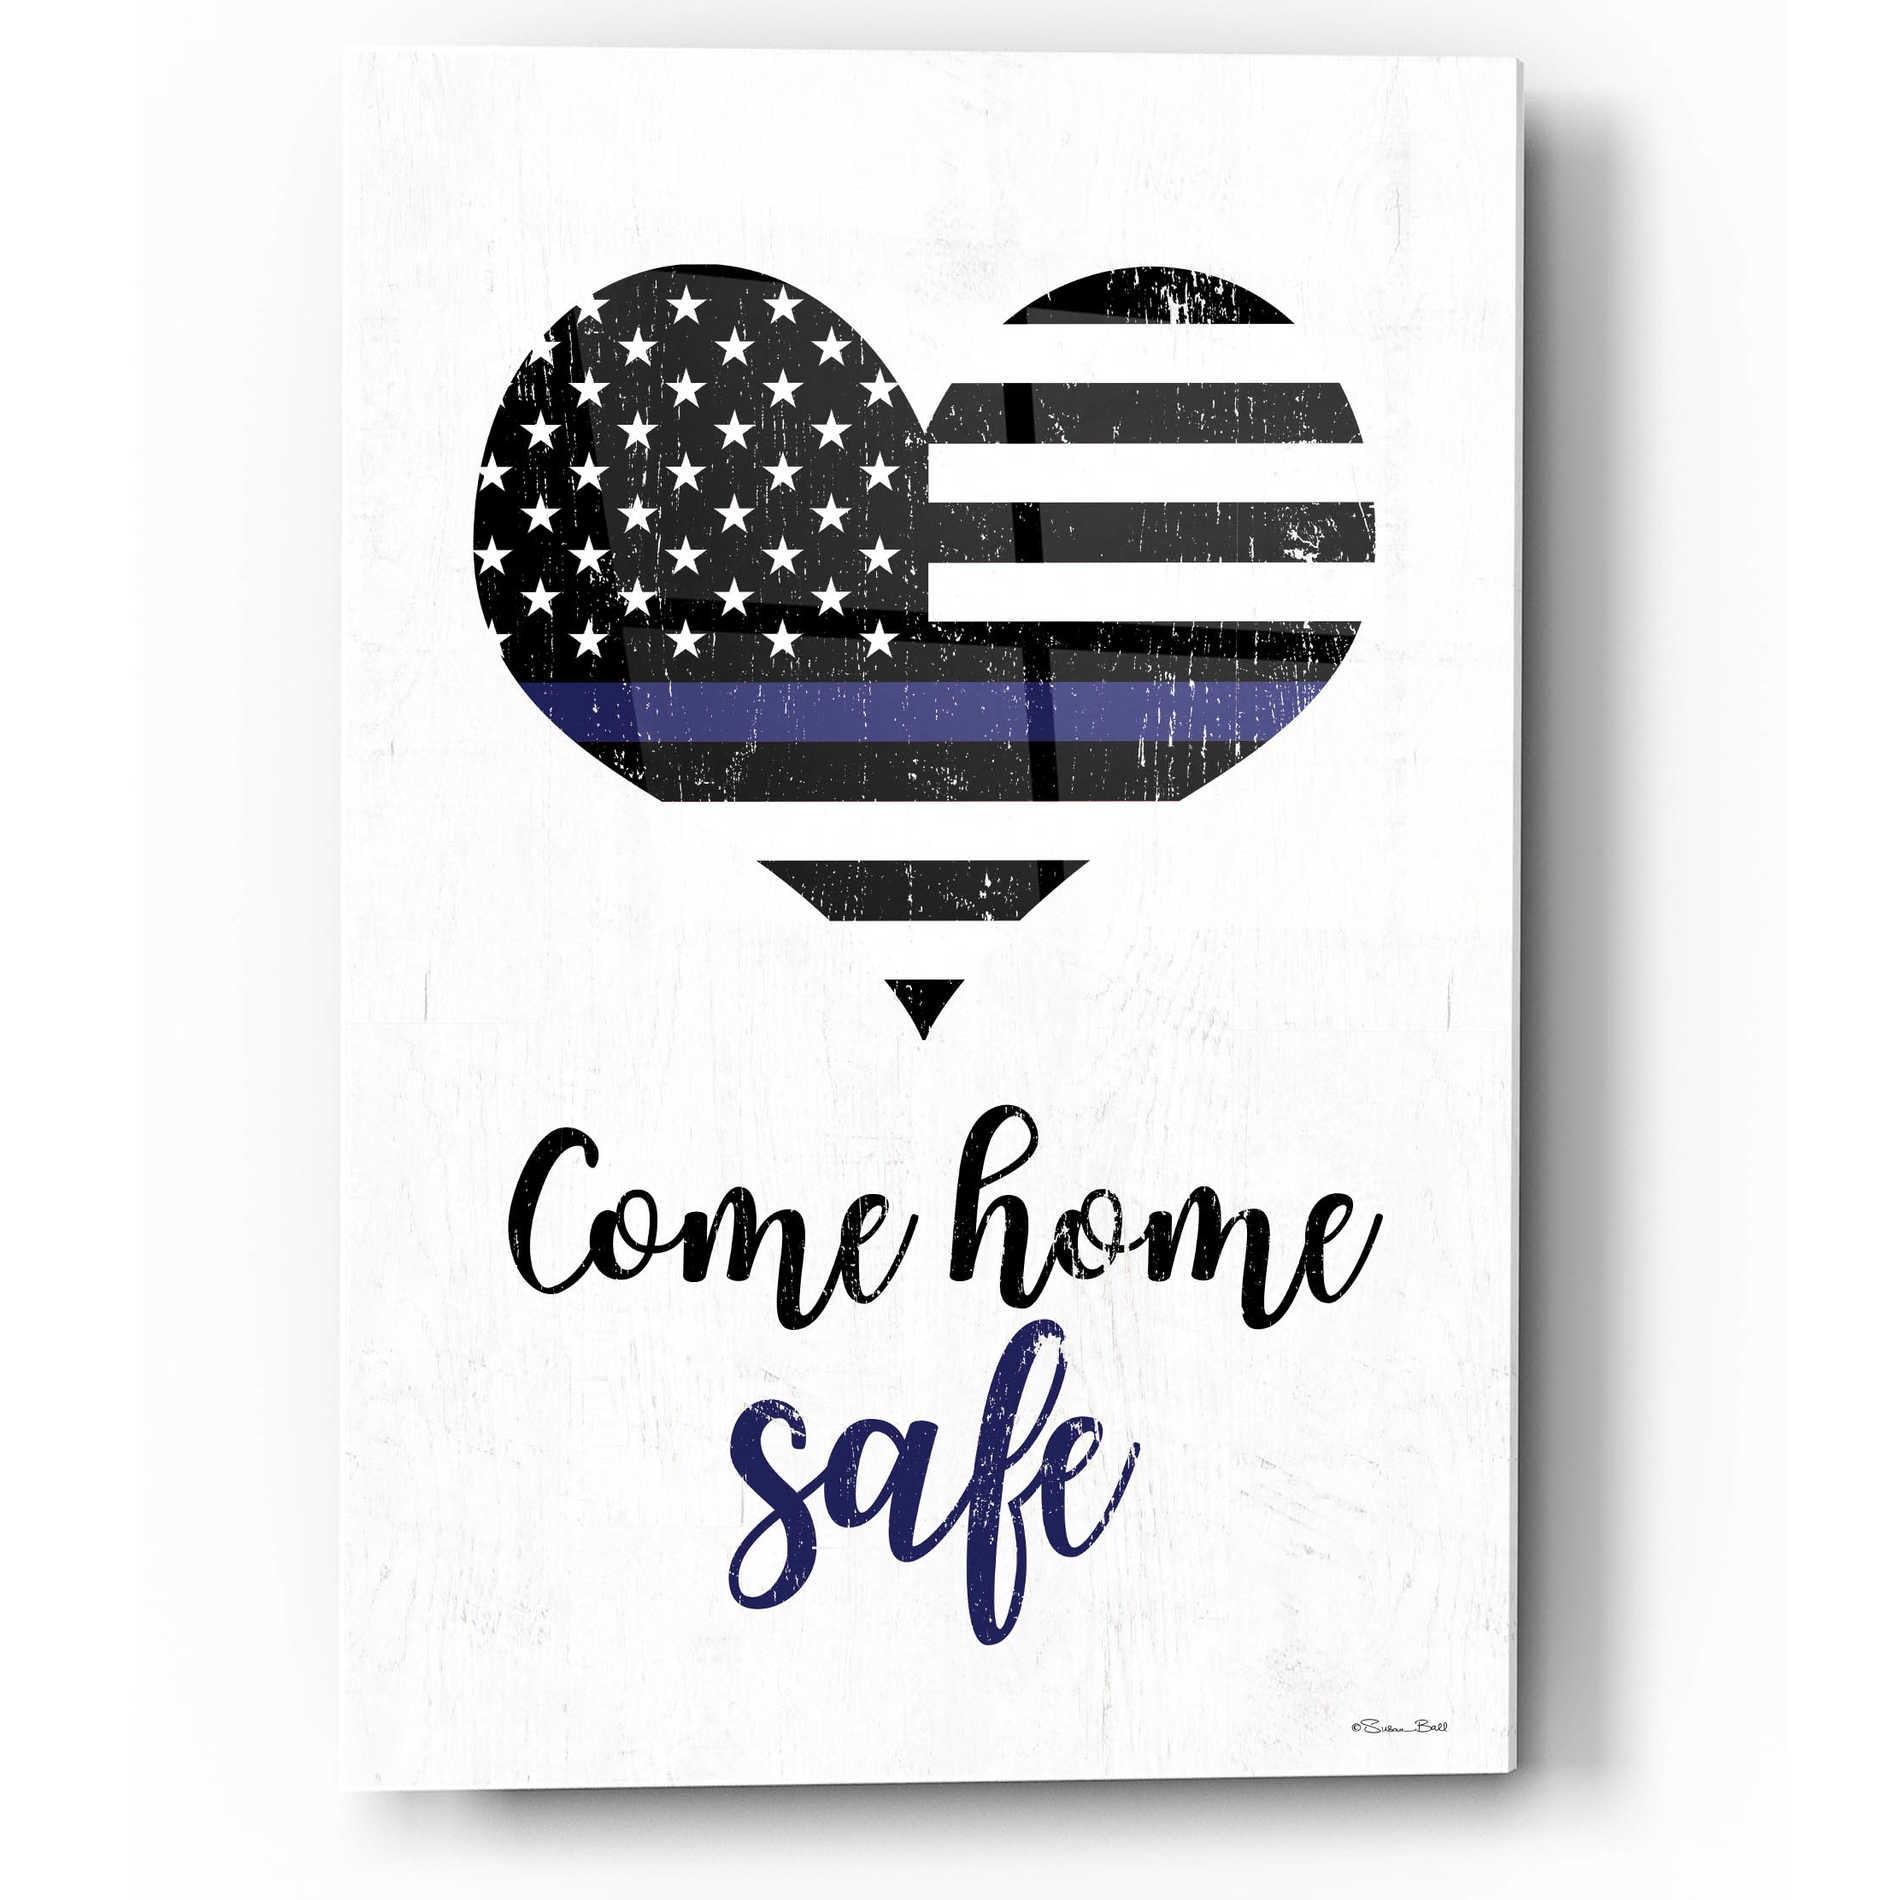 Epic Art 'Come Home Safe' by Susan Ball, Acrylic Glass Wall Art